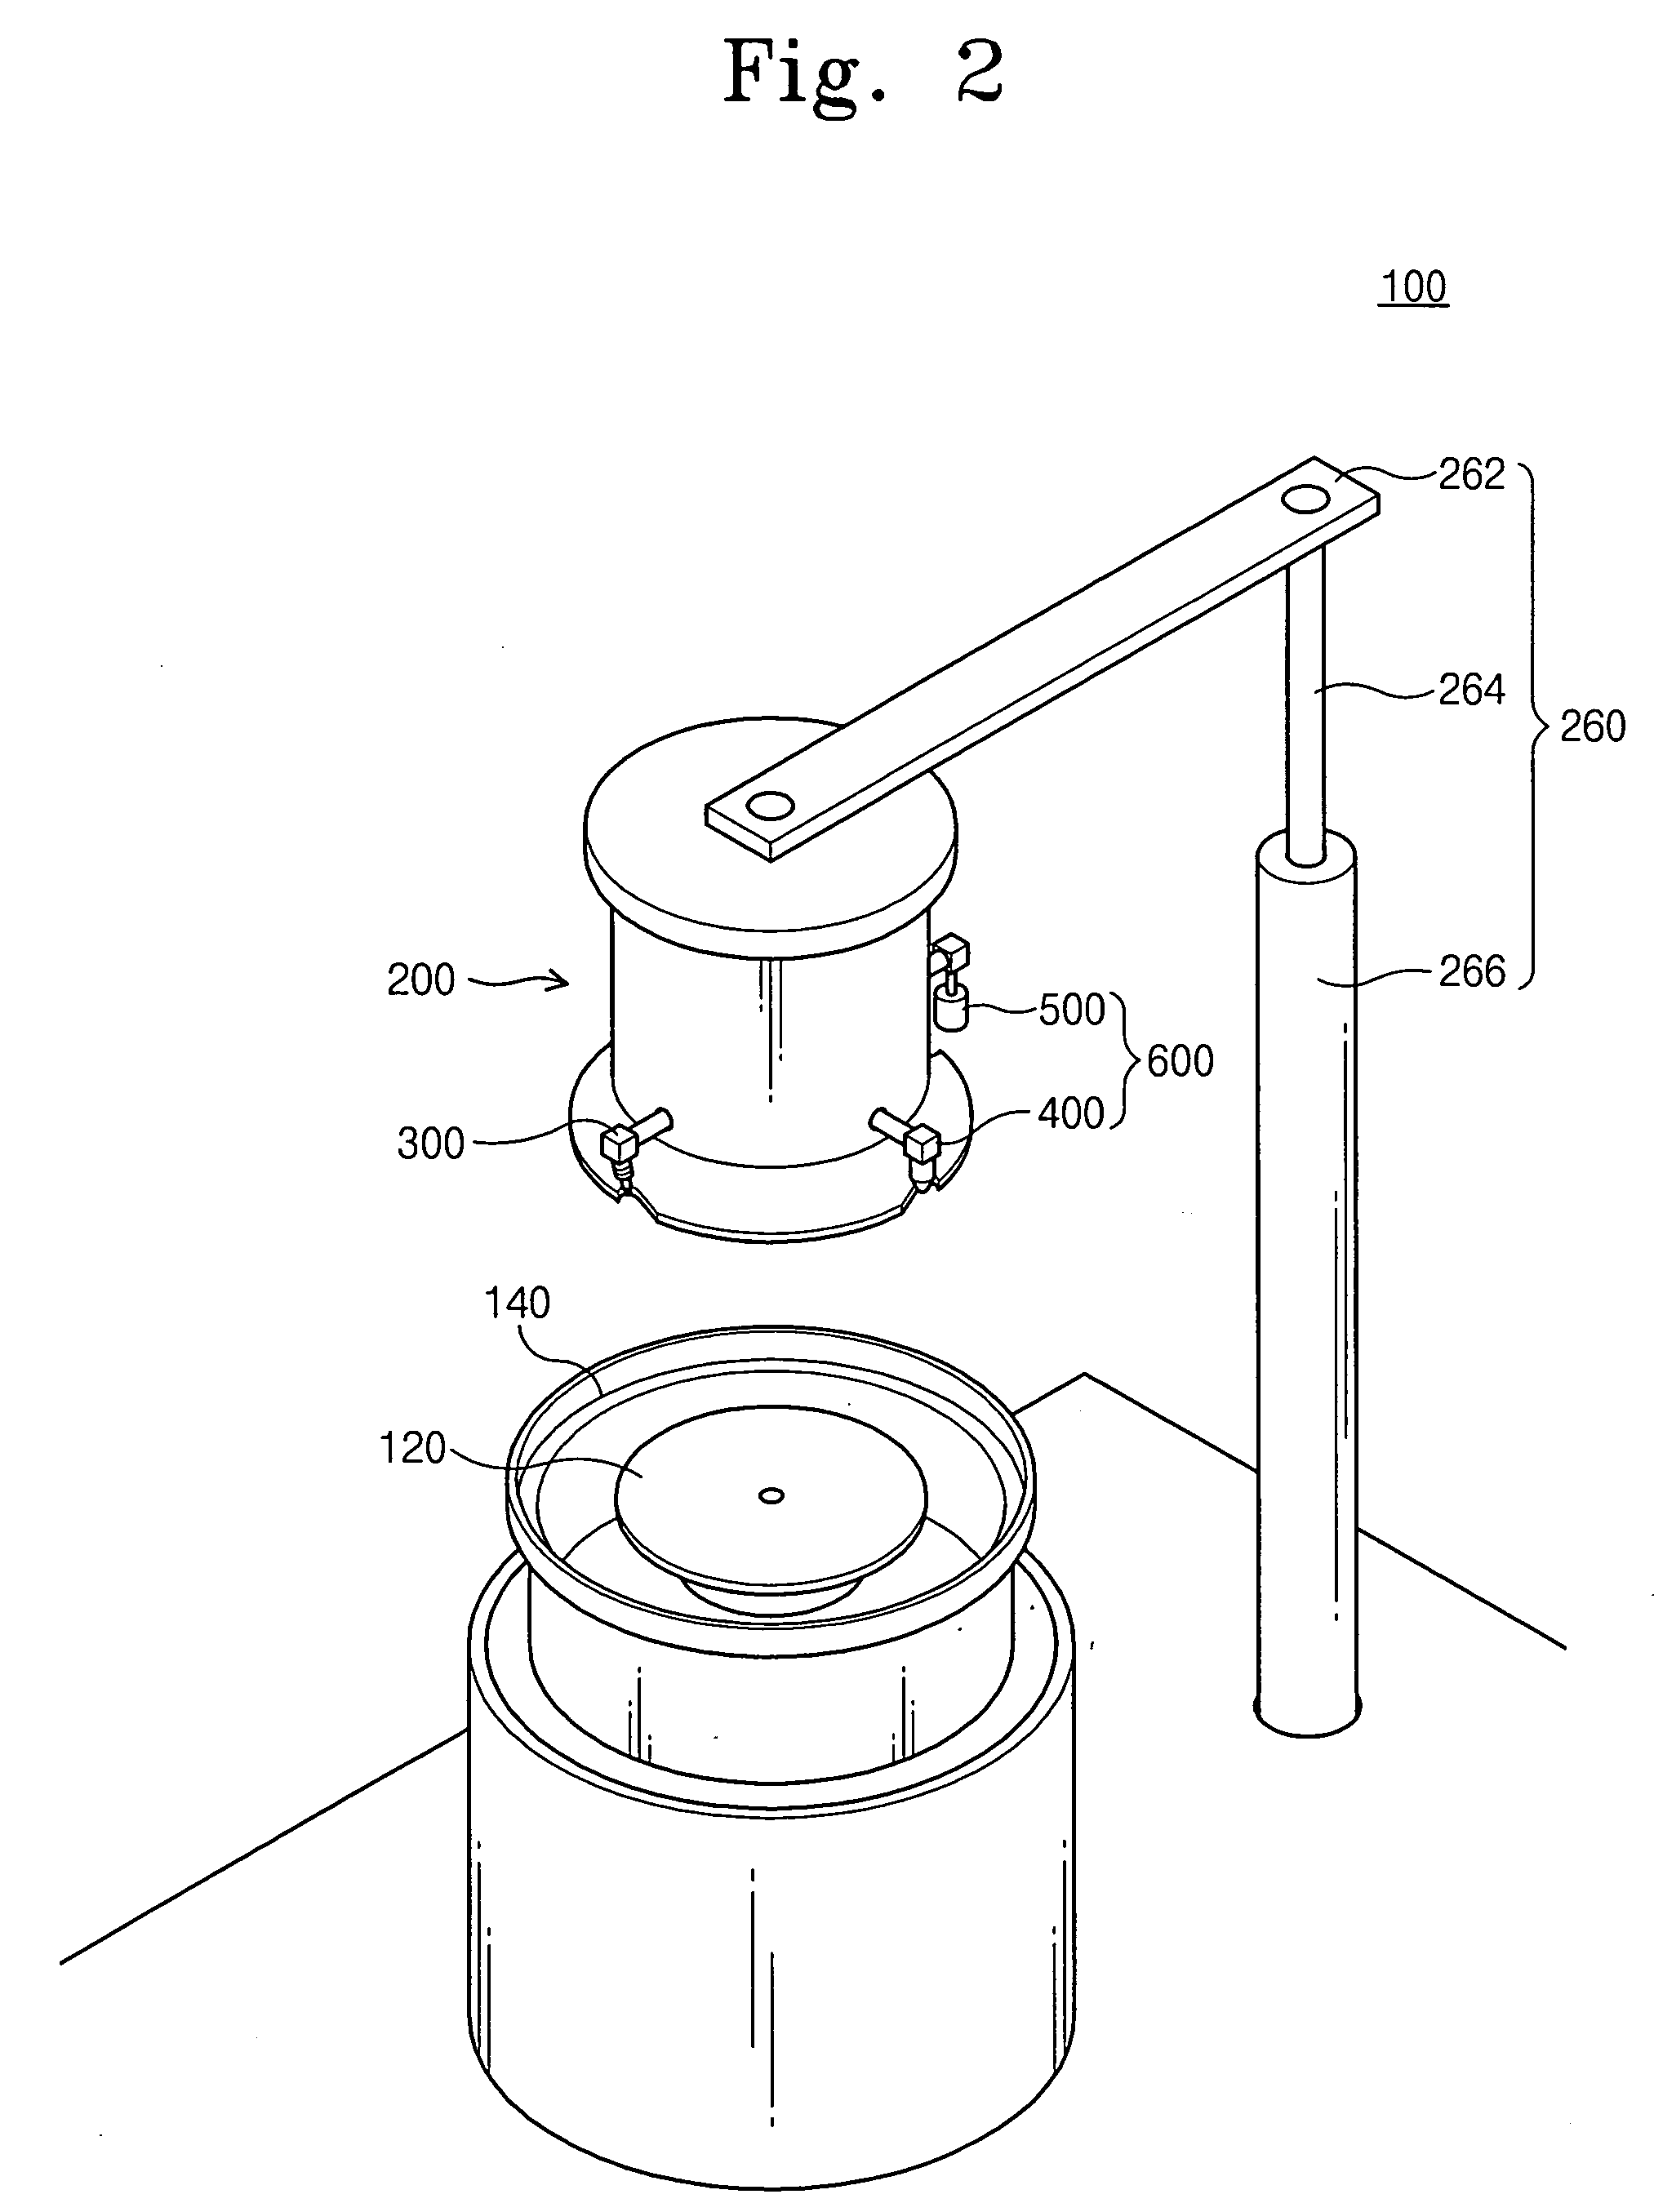 Apparatus and method for treating edge of substrate